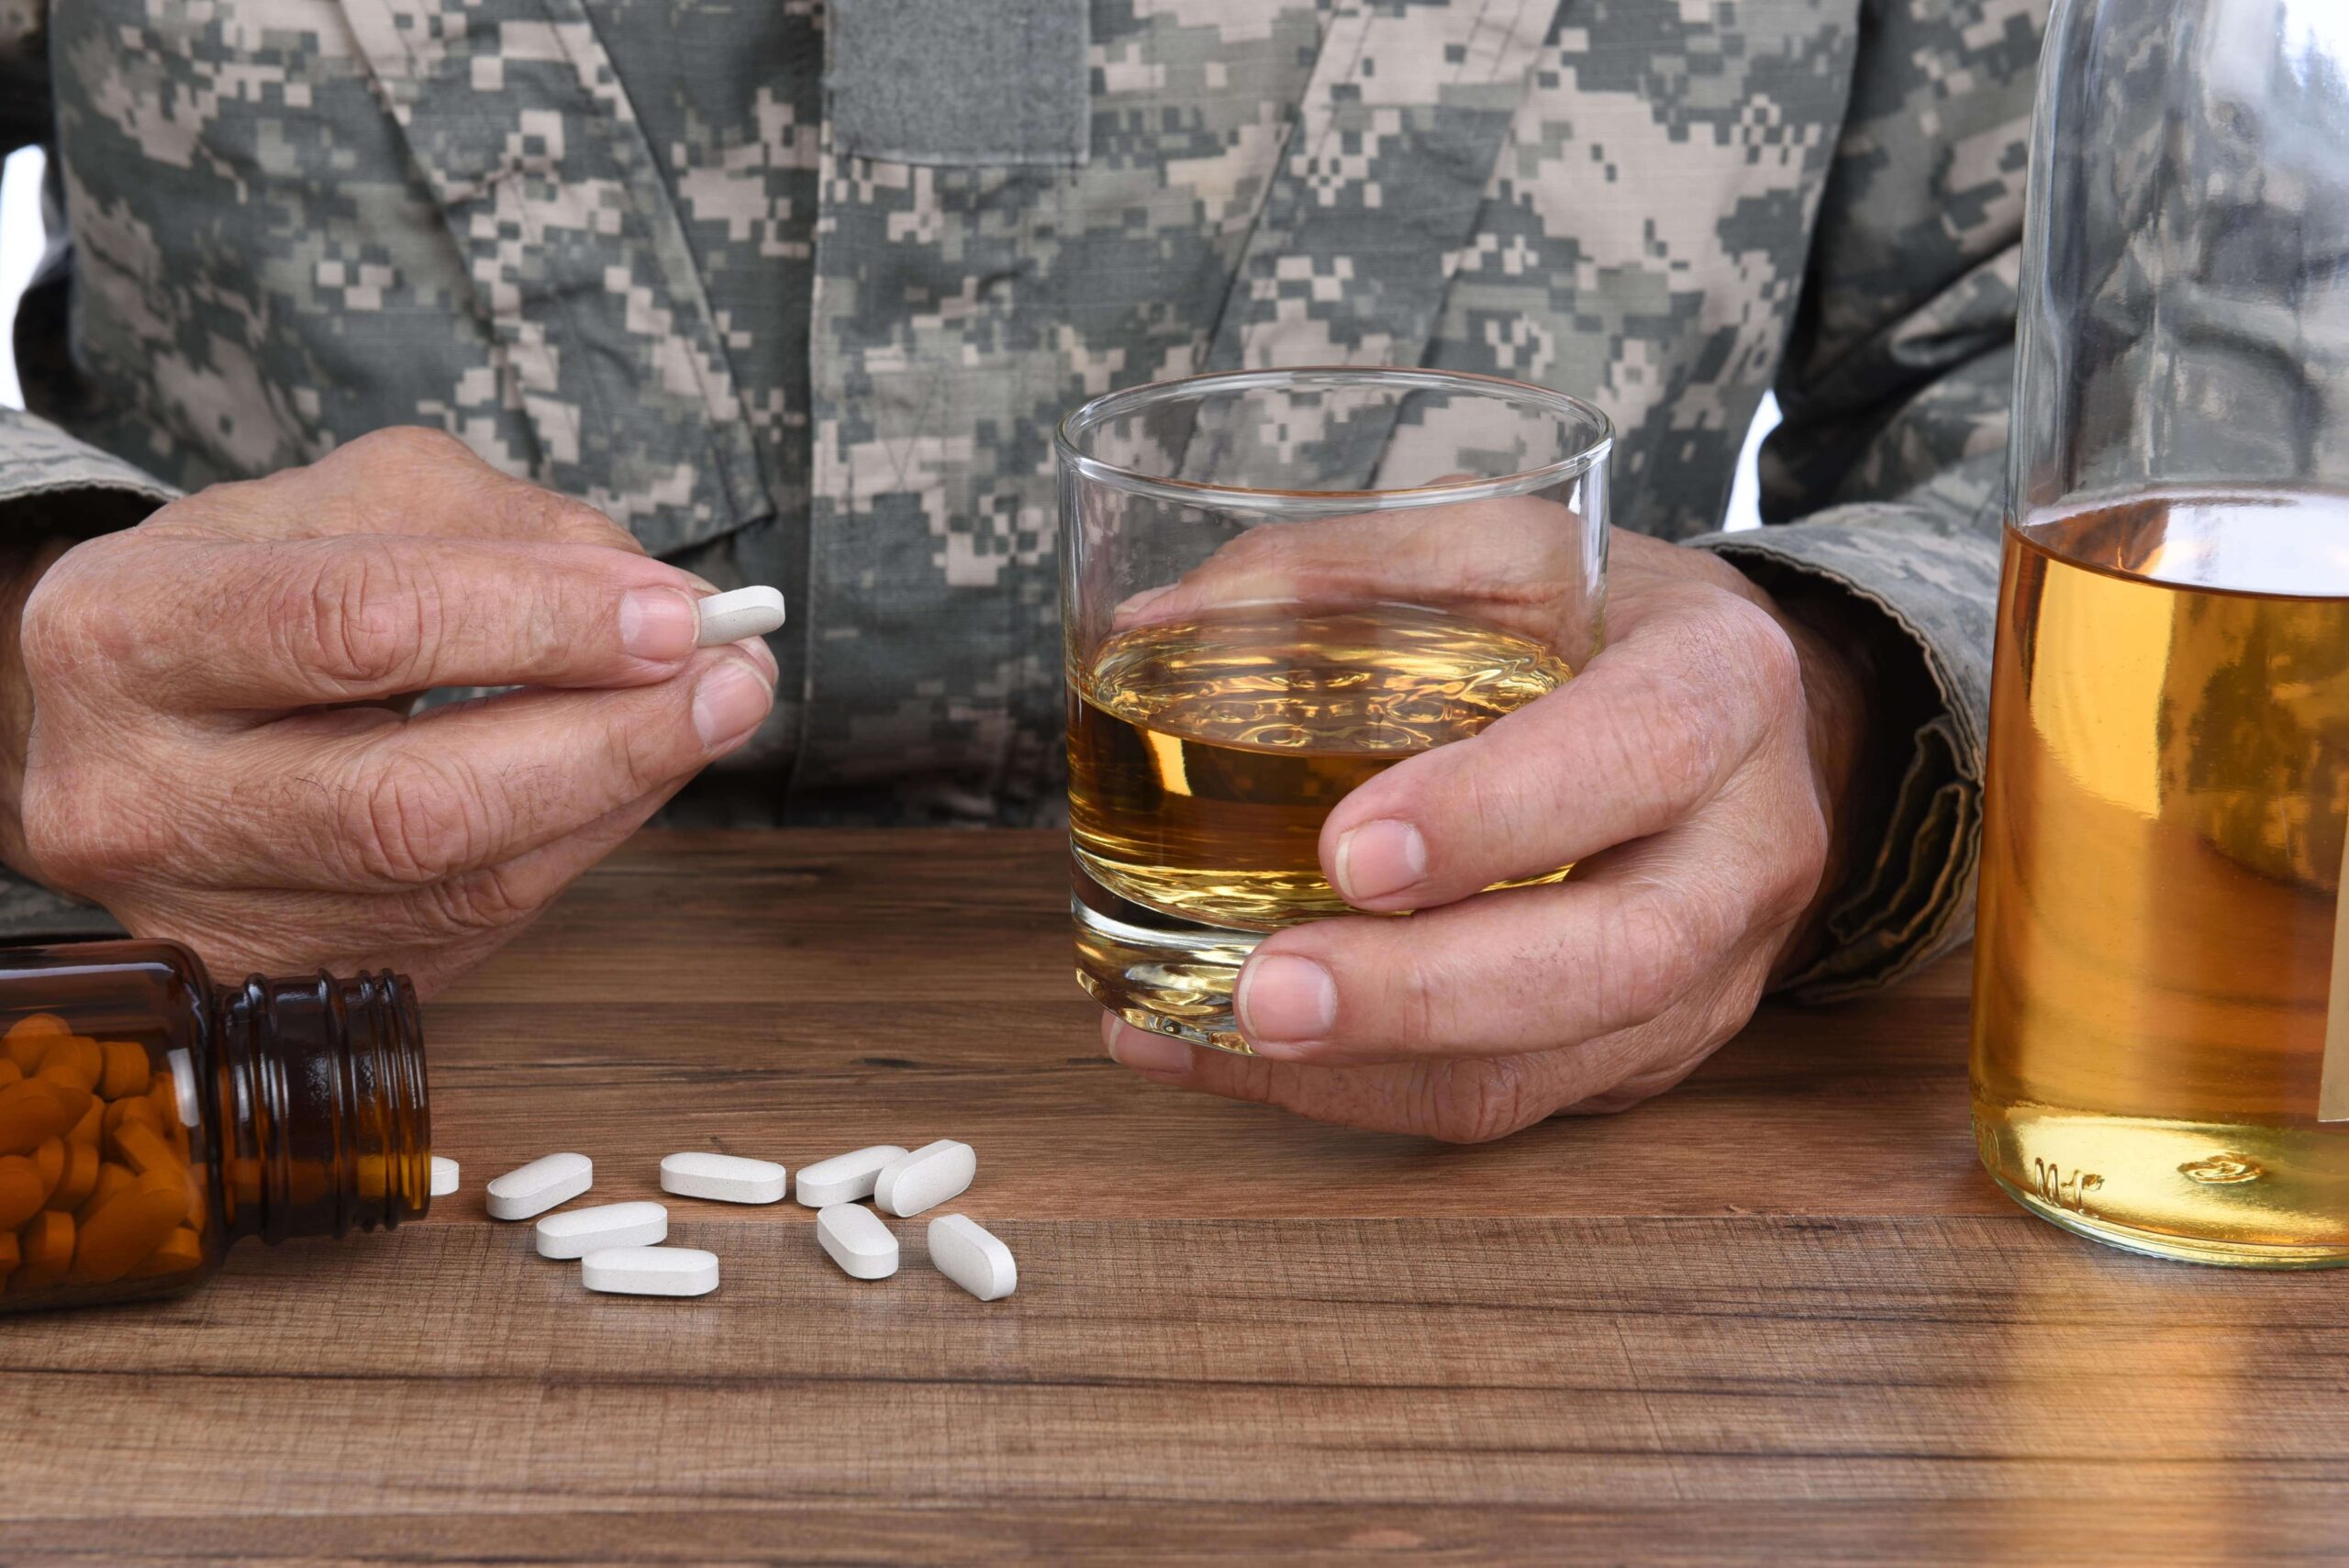 military veteran taking drugs and drinking alcohol